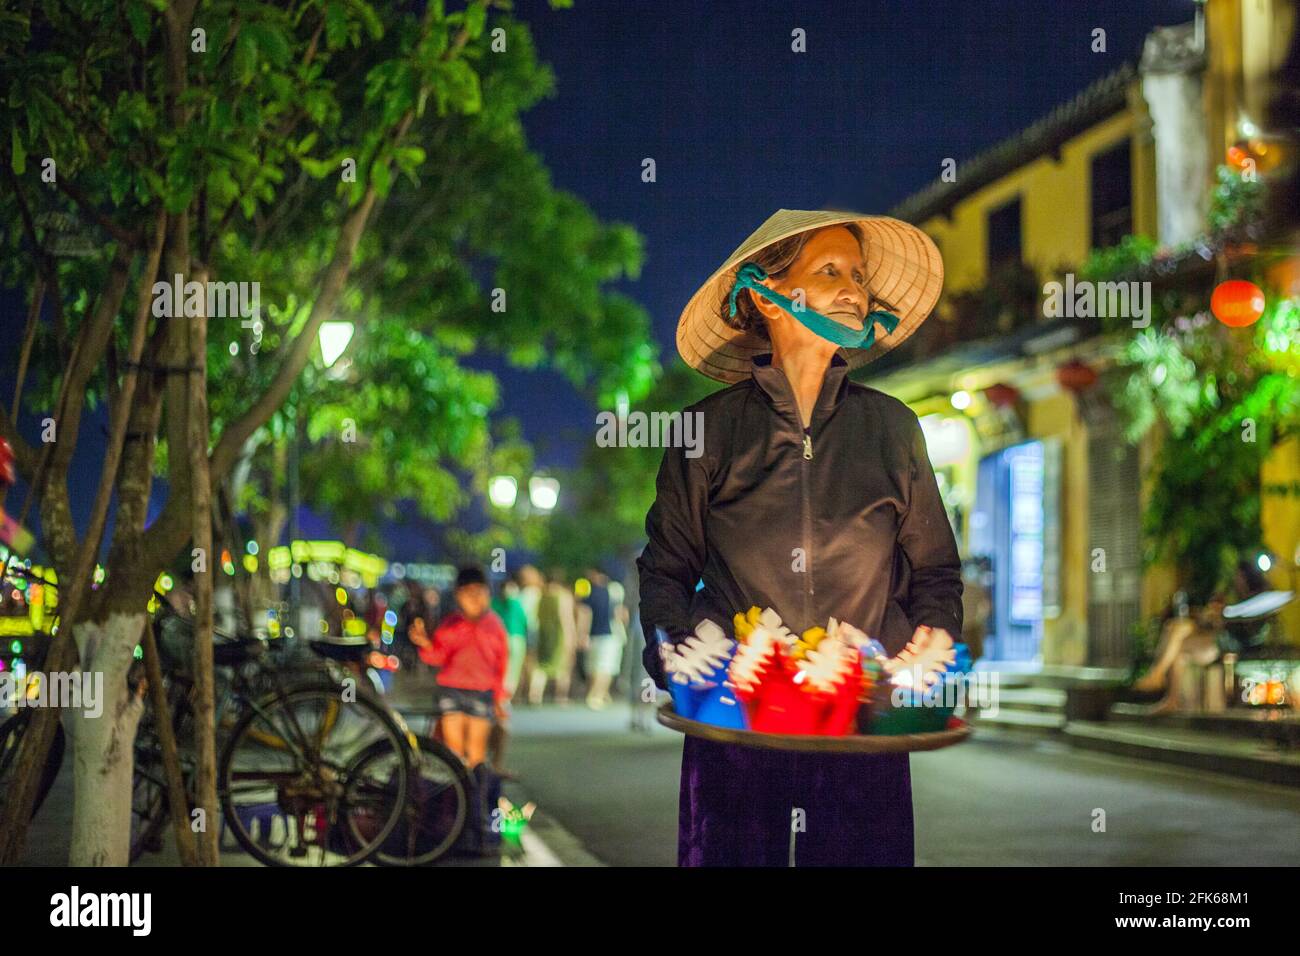 Elderly Vietnamese lady sells colourful floating lanterns by the riverside at dusk, Old Town, Hoi An, Vietnam Stock Photo